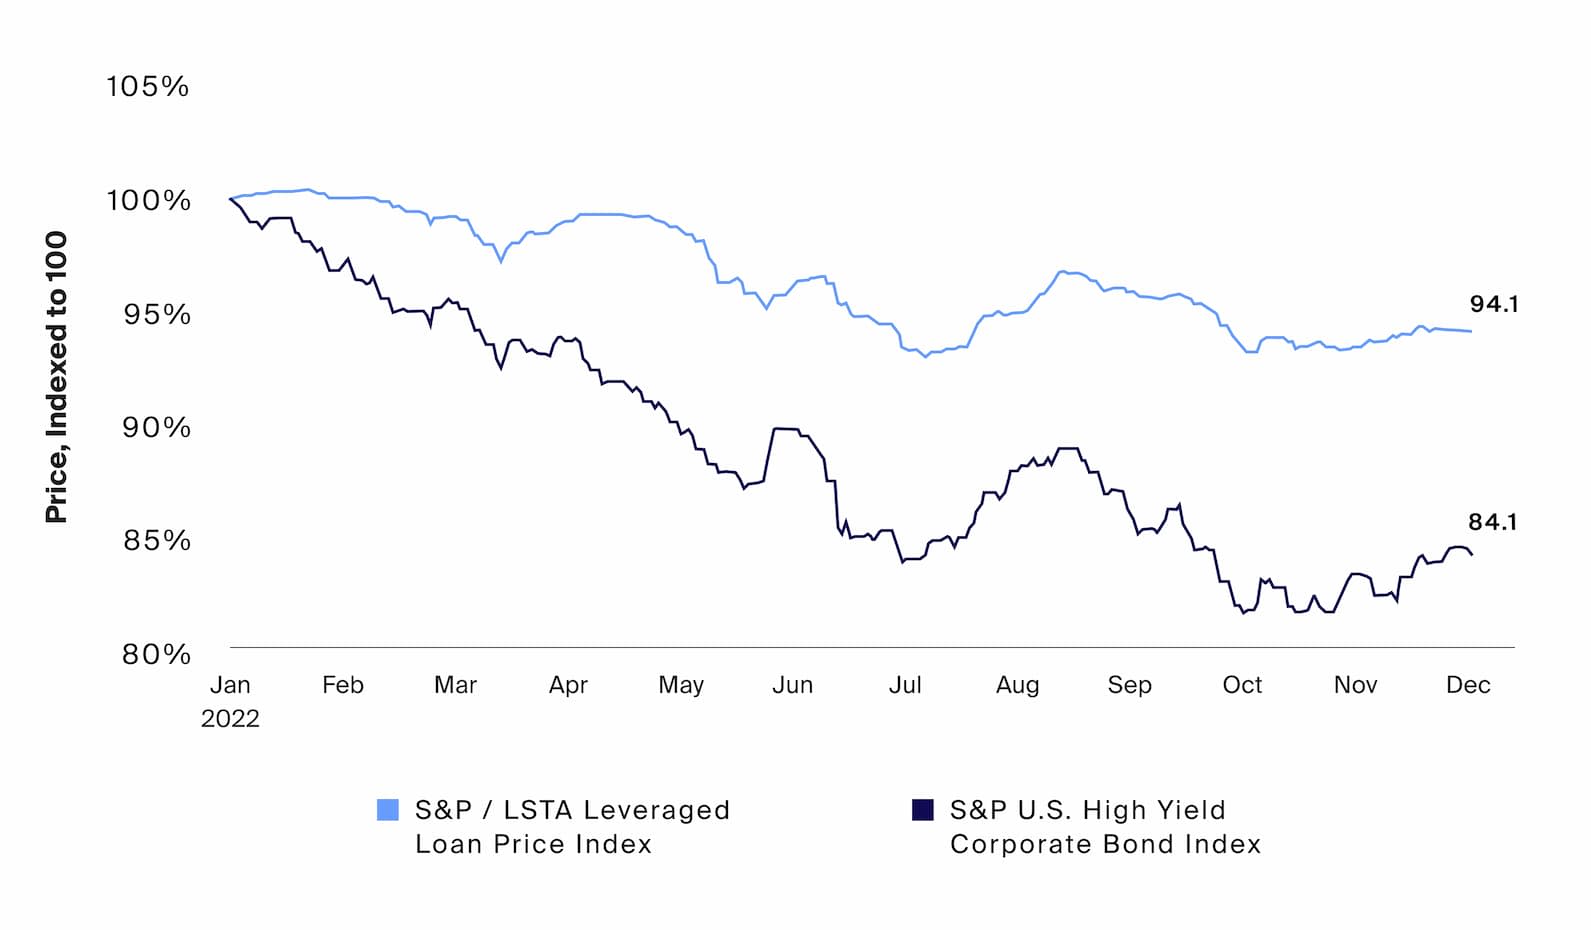 While the decline in high-yield bond and leveraged loan prices may offer relatively more attractive valuations and yields in the secondary markets...